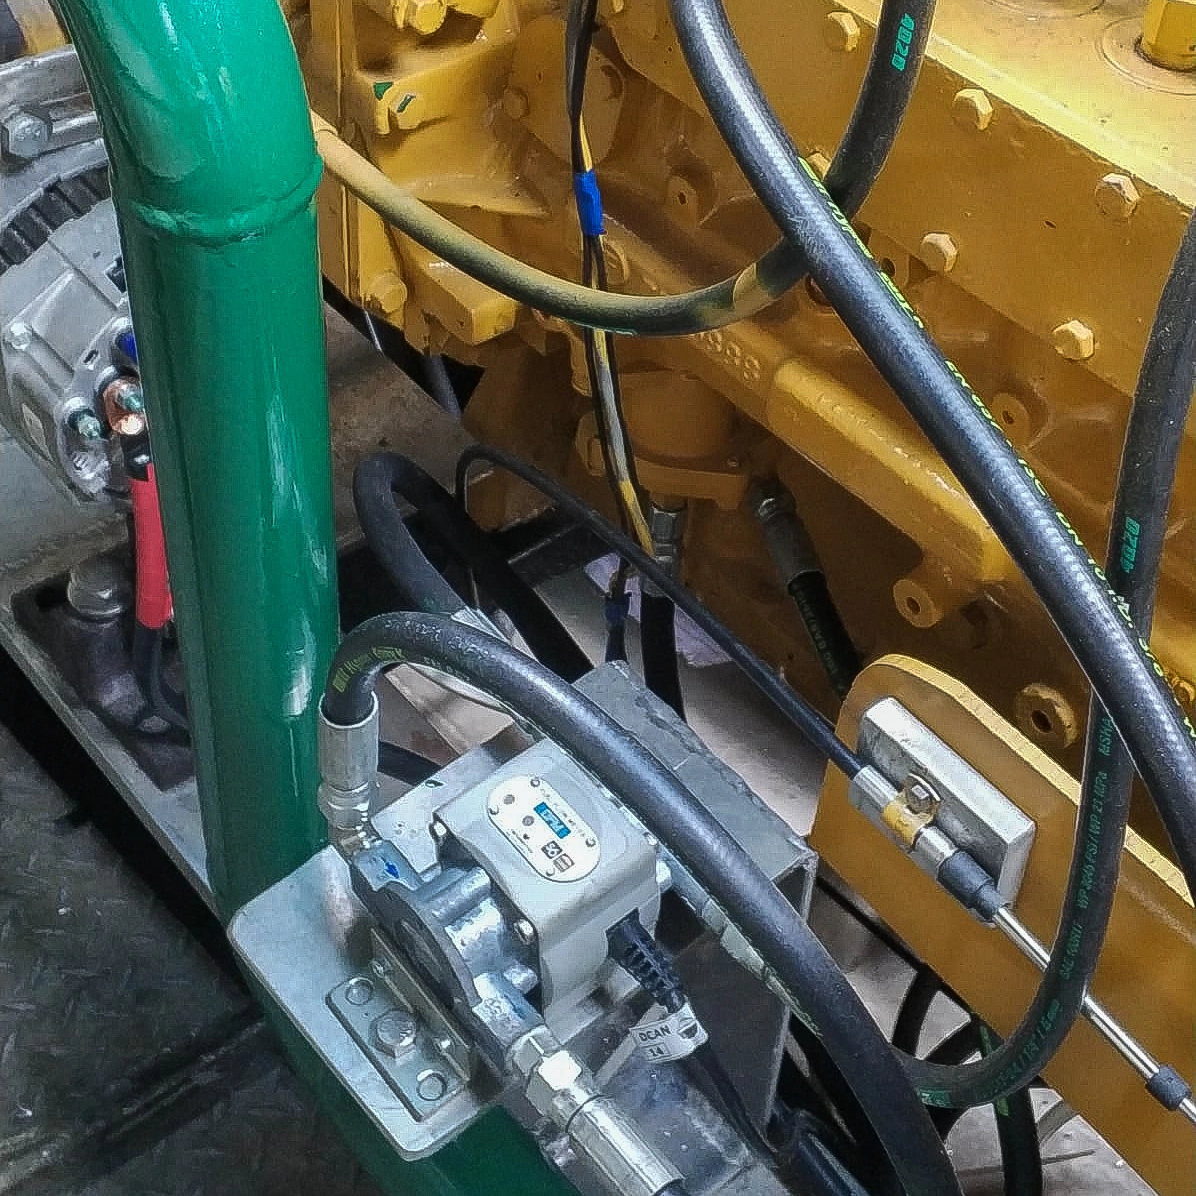 The fuel flow meter is installed directly in the engine fuel line